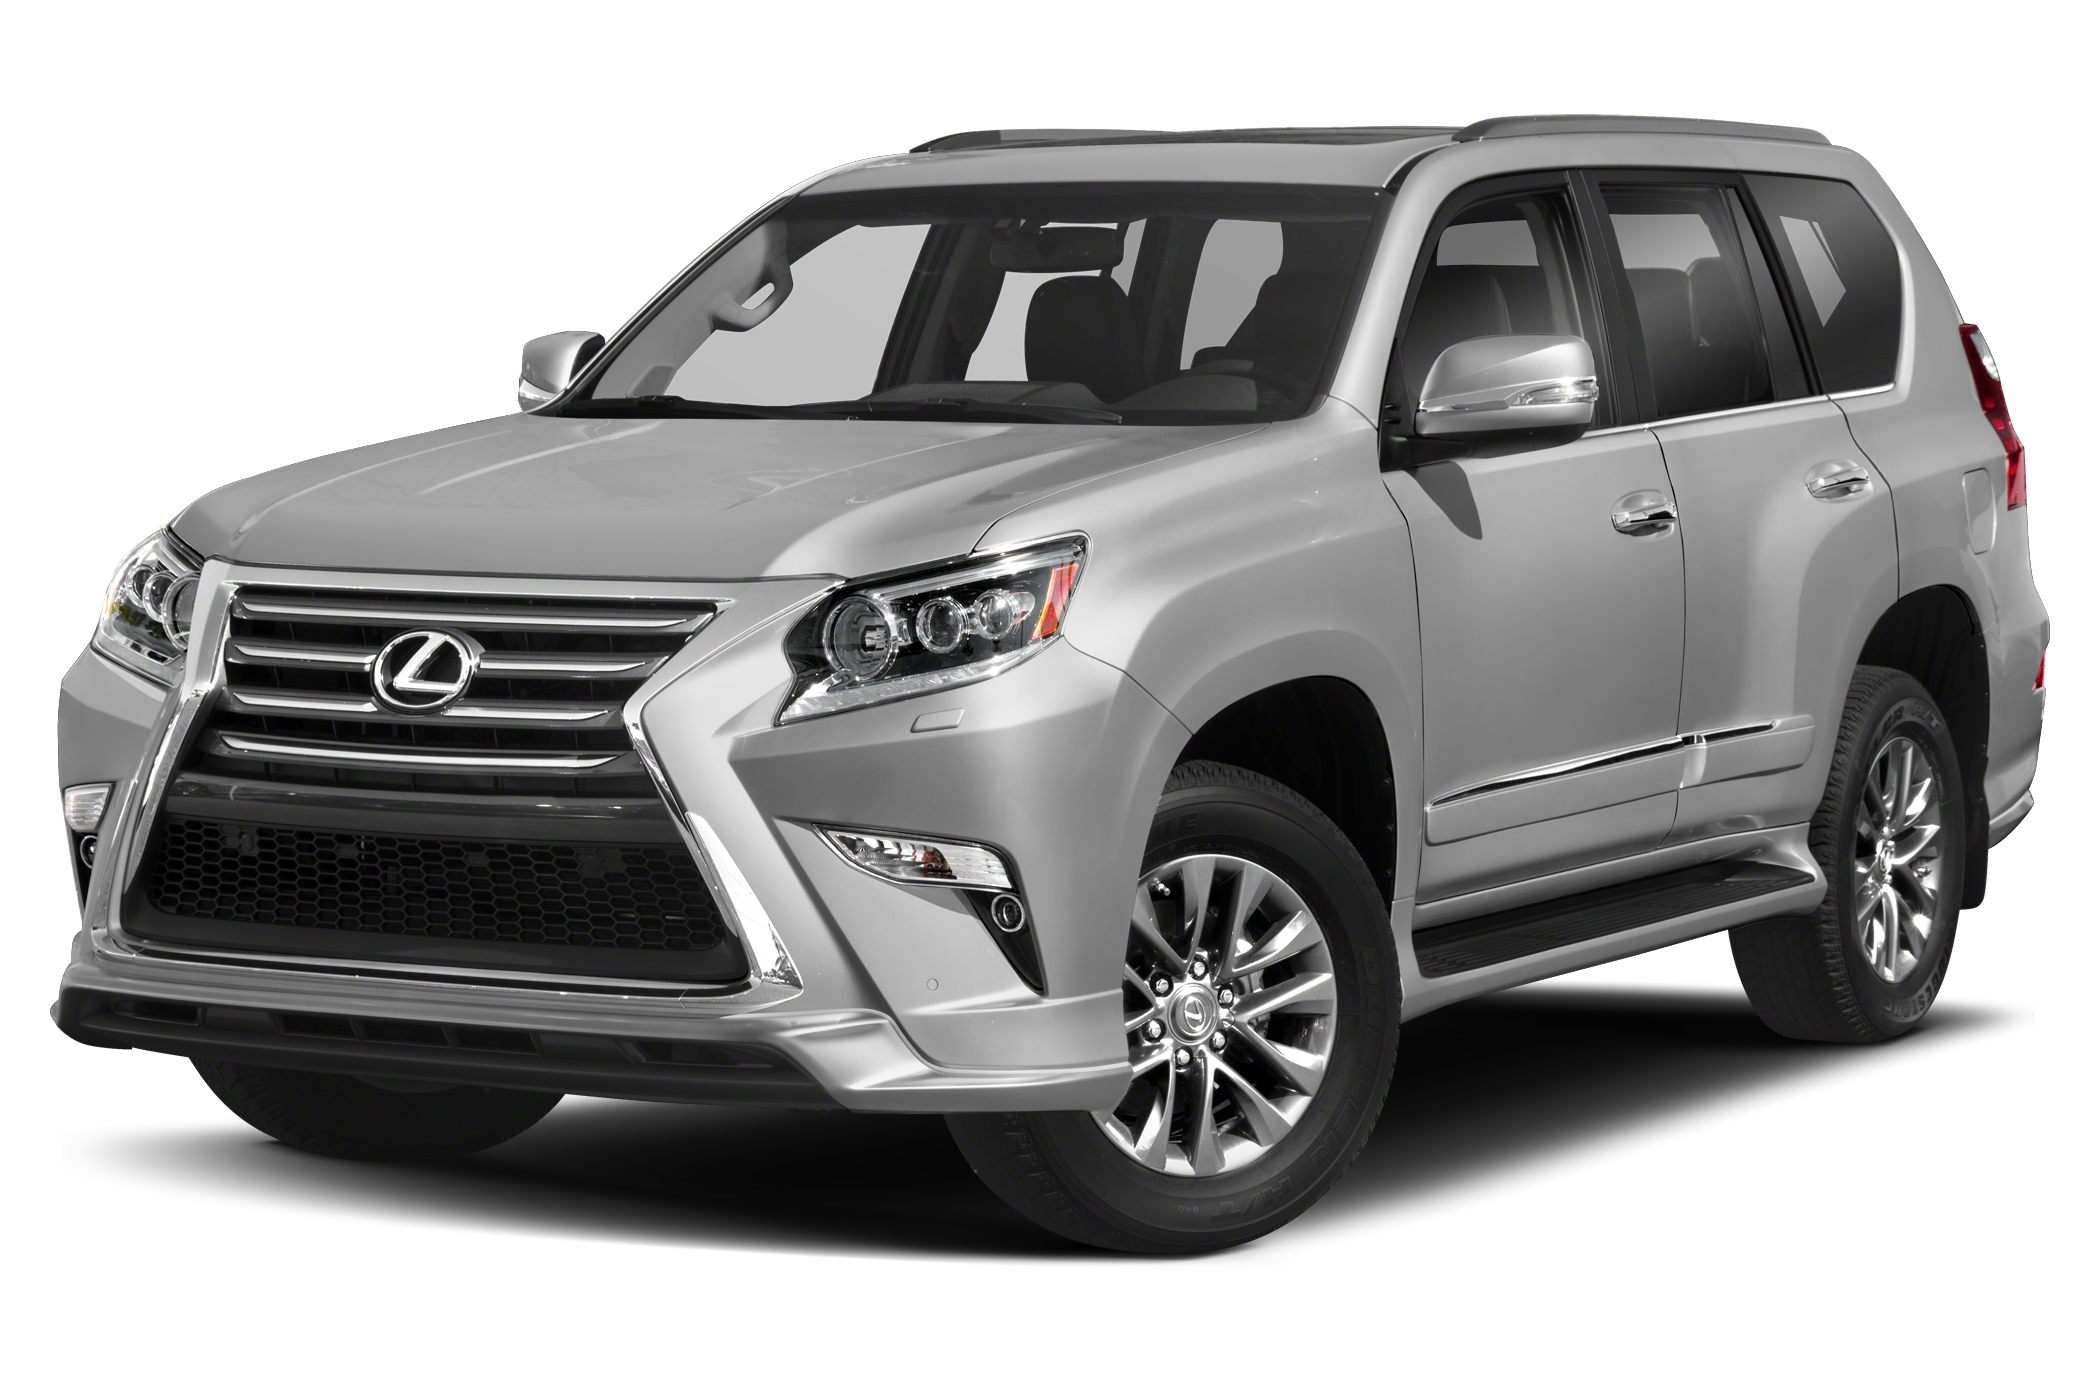 New 2021 Lexus Gx 460 Safety Rating, Standard Features